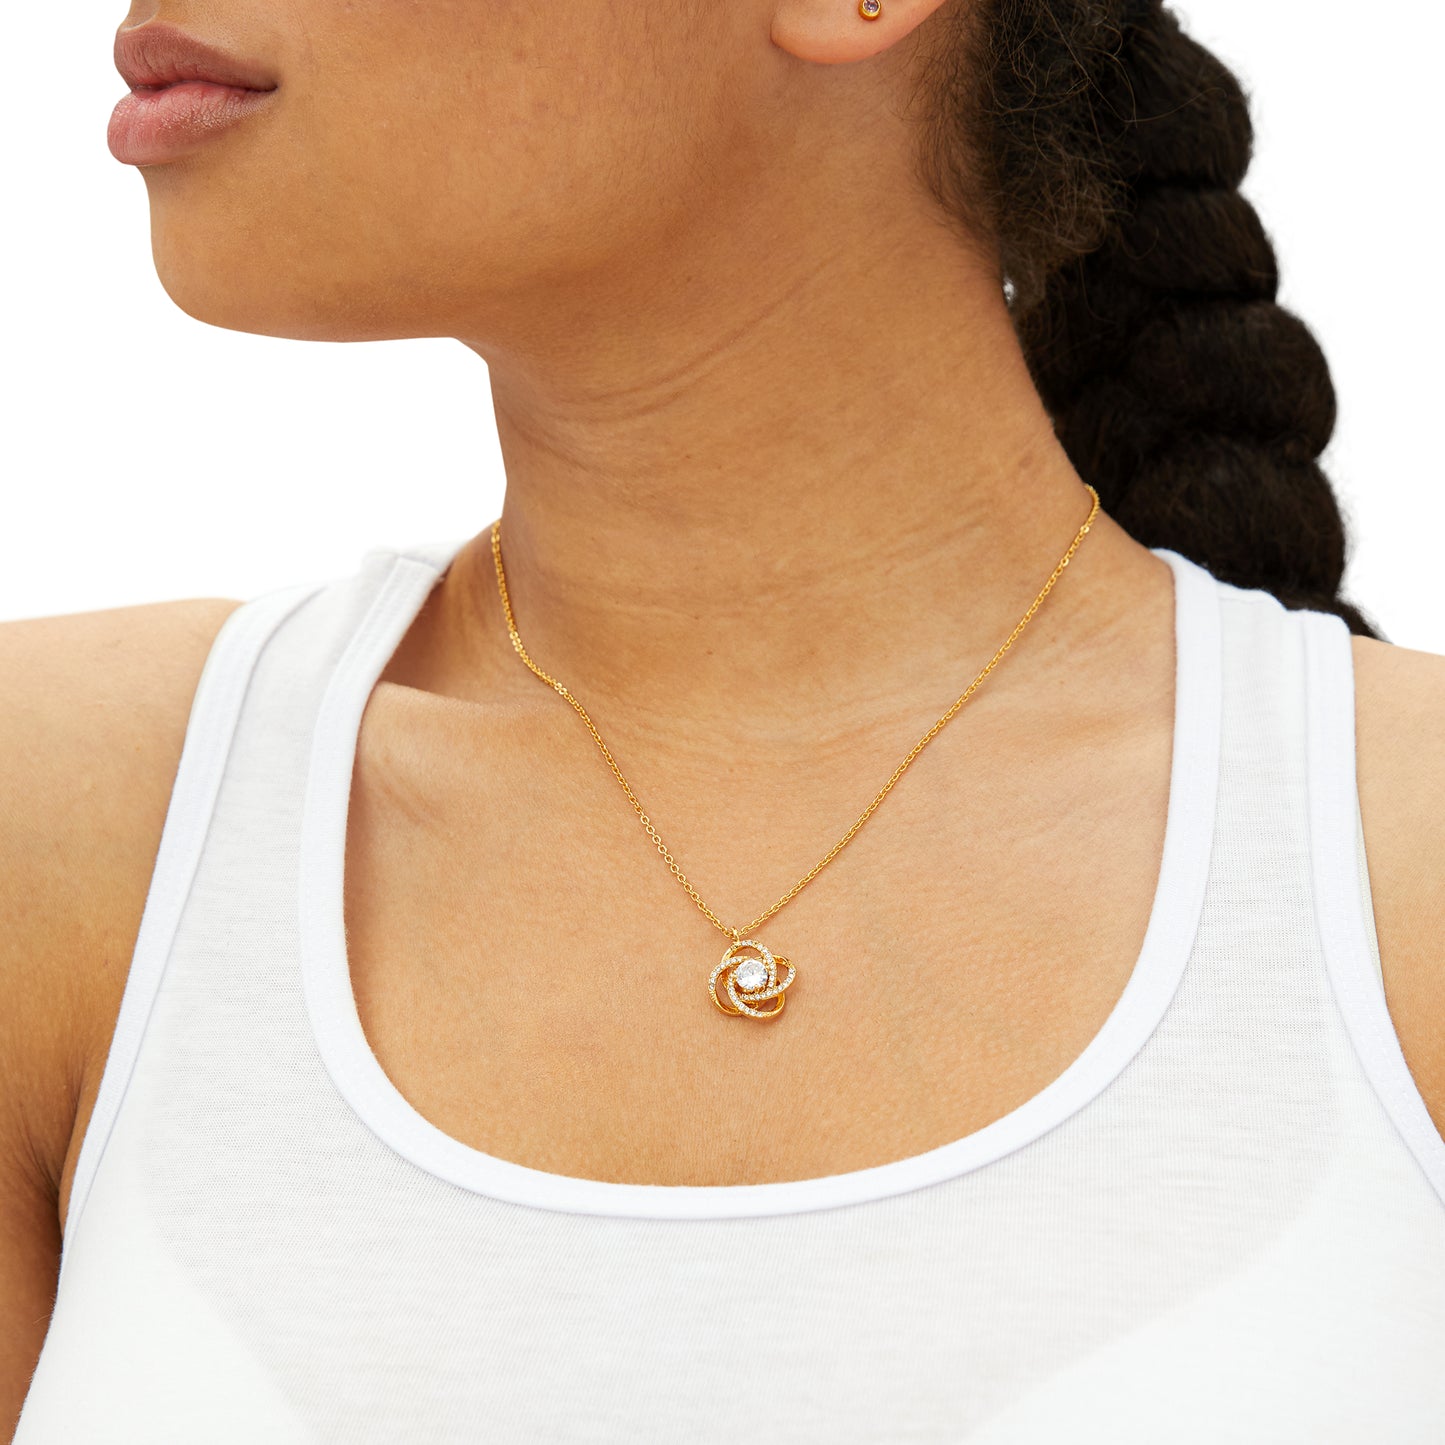 Bully-Proof Love Knot Necklace